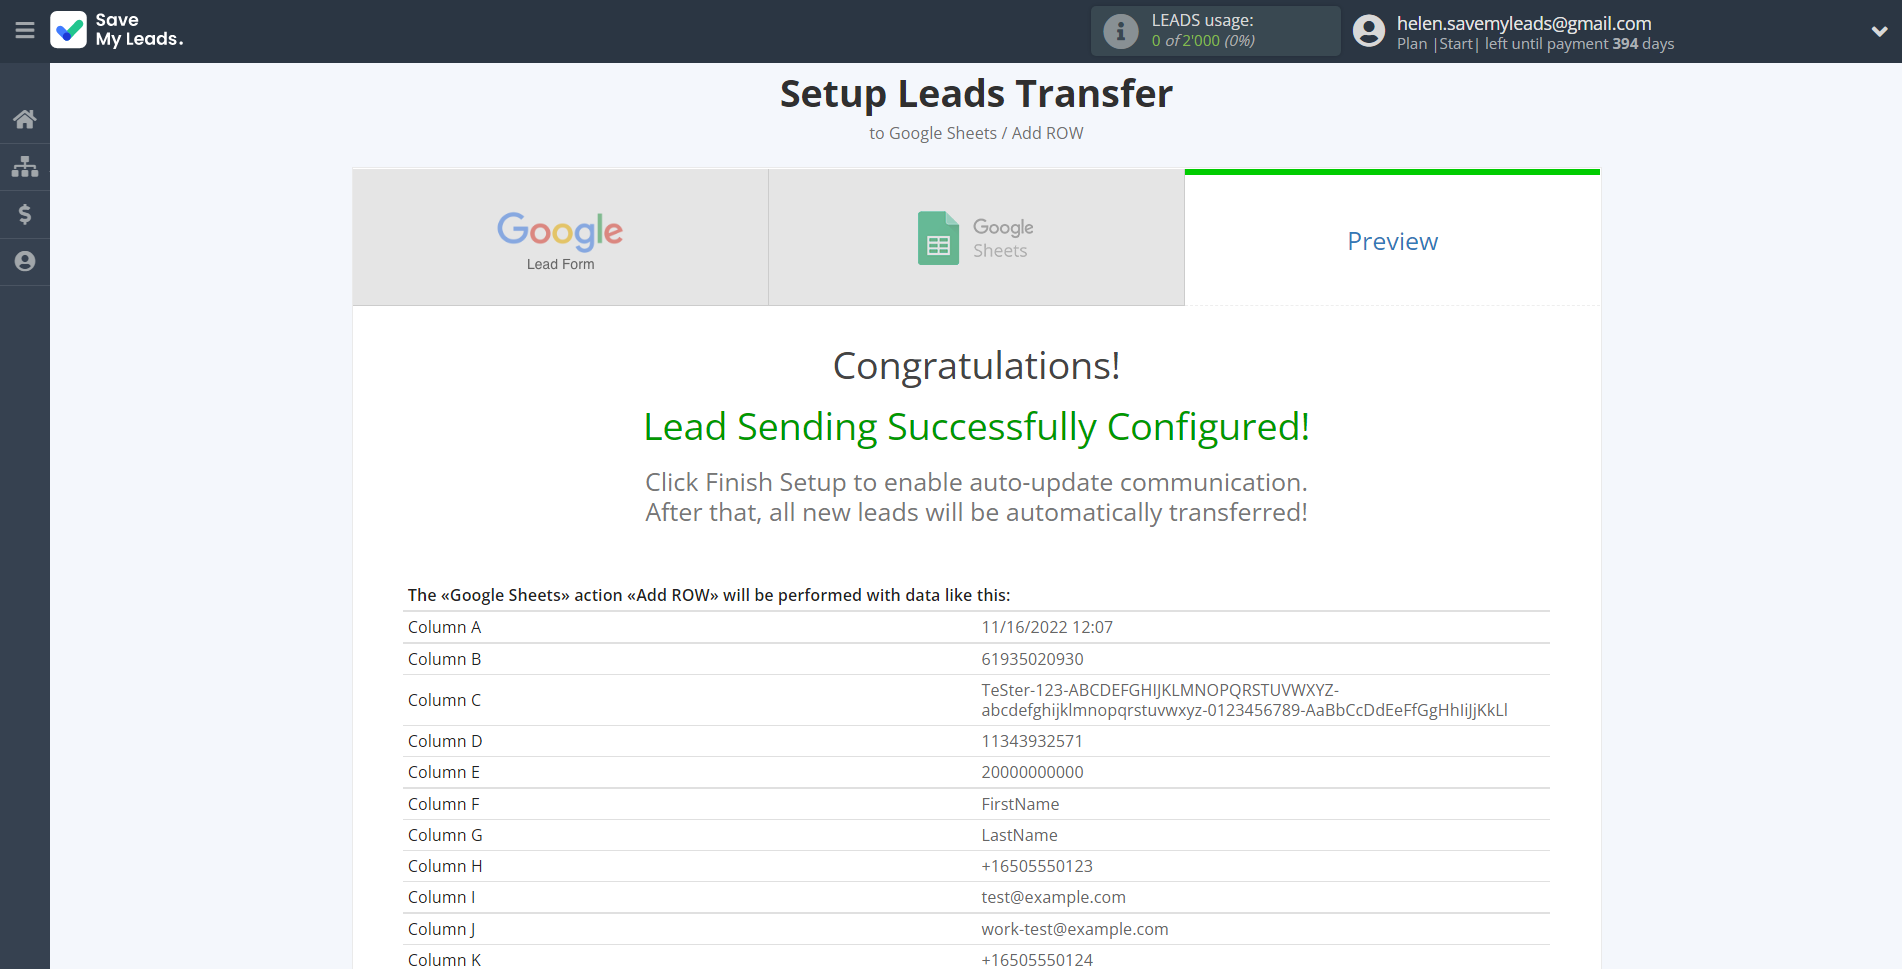 How to Connect Google Lead Form with Google Sheets |&nbsp;Test data